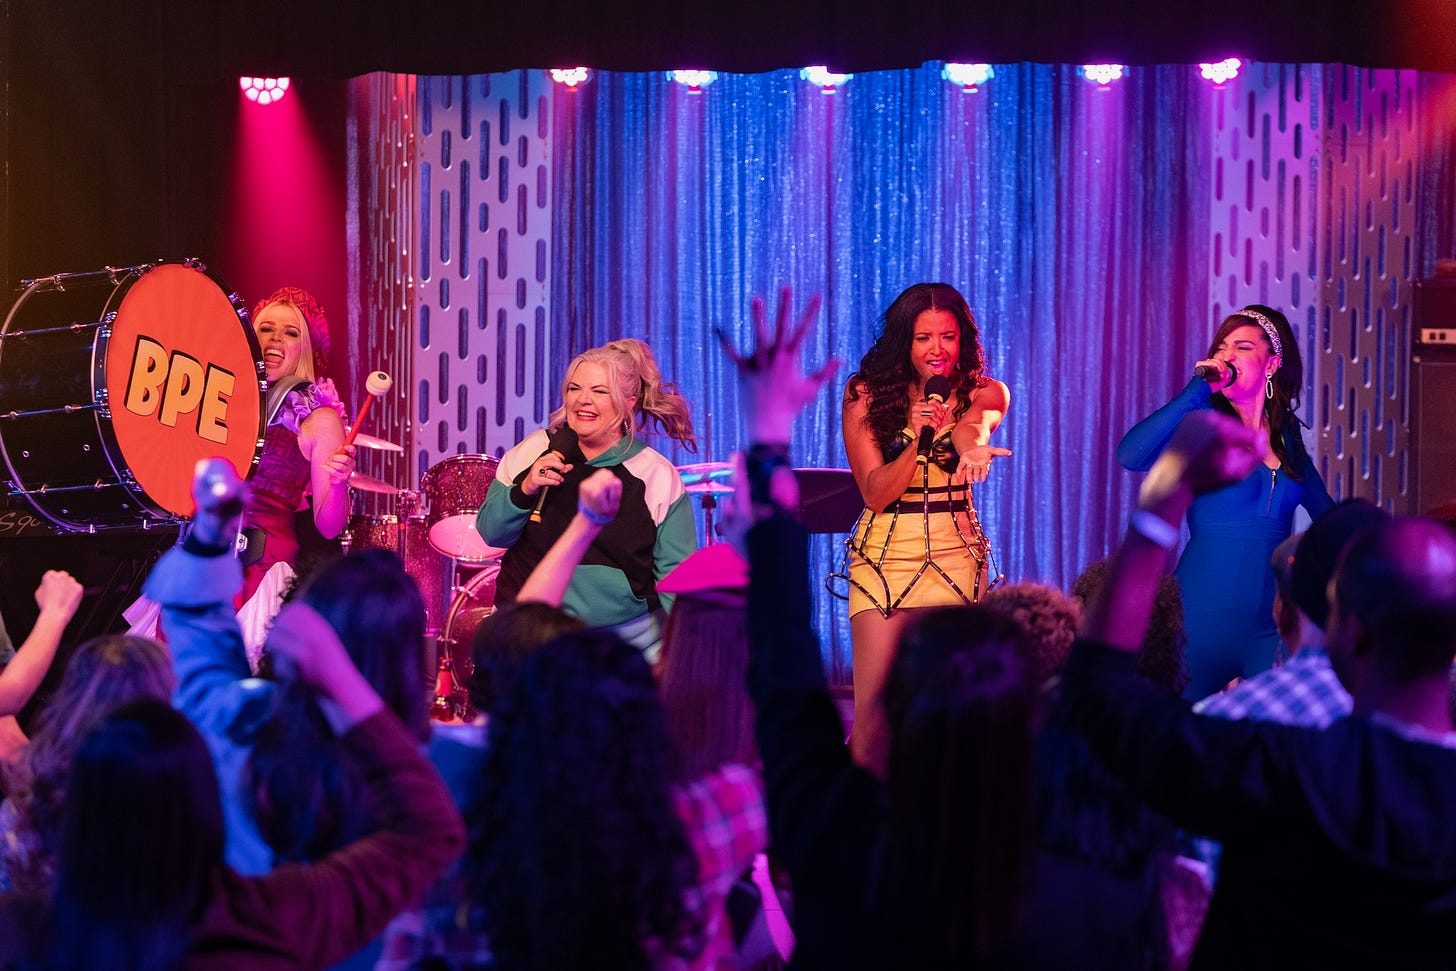 (l-r) Busy Philipps as Summer, Paula Pell as Gloria, Renee Elise Goldsberry as Wickie, and Sara Bareilles as Dawn in GIRLS5EVA. The women are performing a song onstage while Summer is wearing a marching drum with BPE written on it.